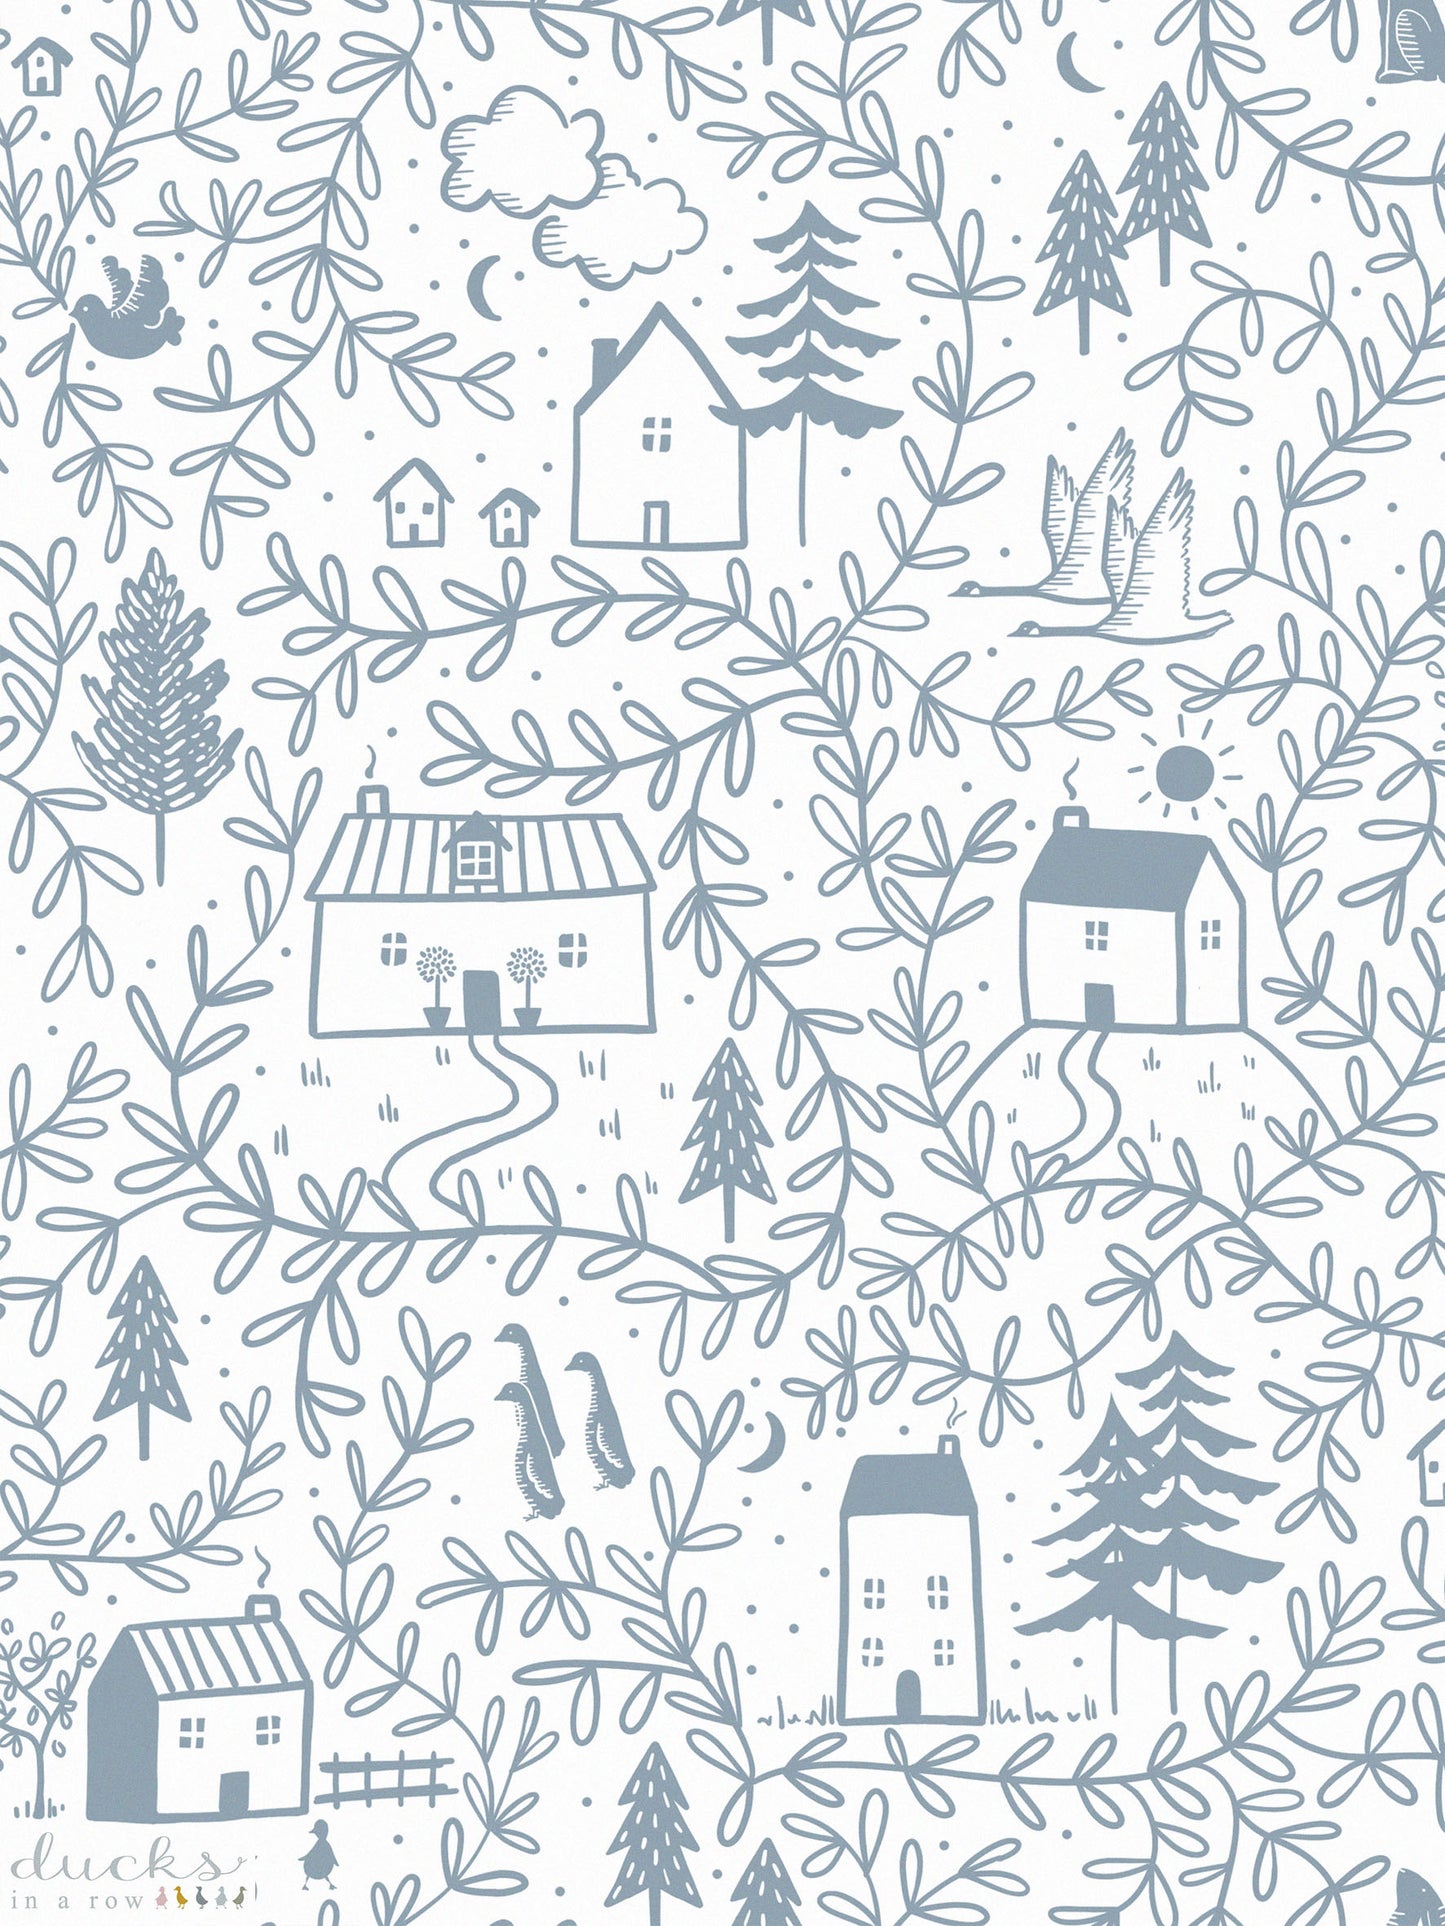 Luxury Children's wallpaper featuring cottages, trees, sunshine, ducks, geese and more